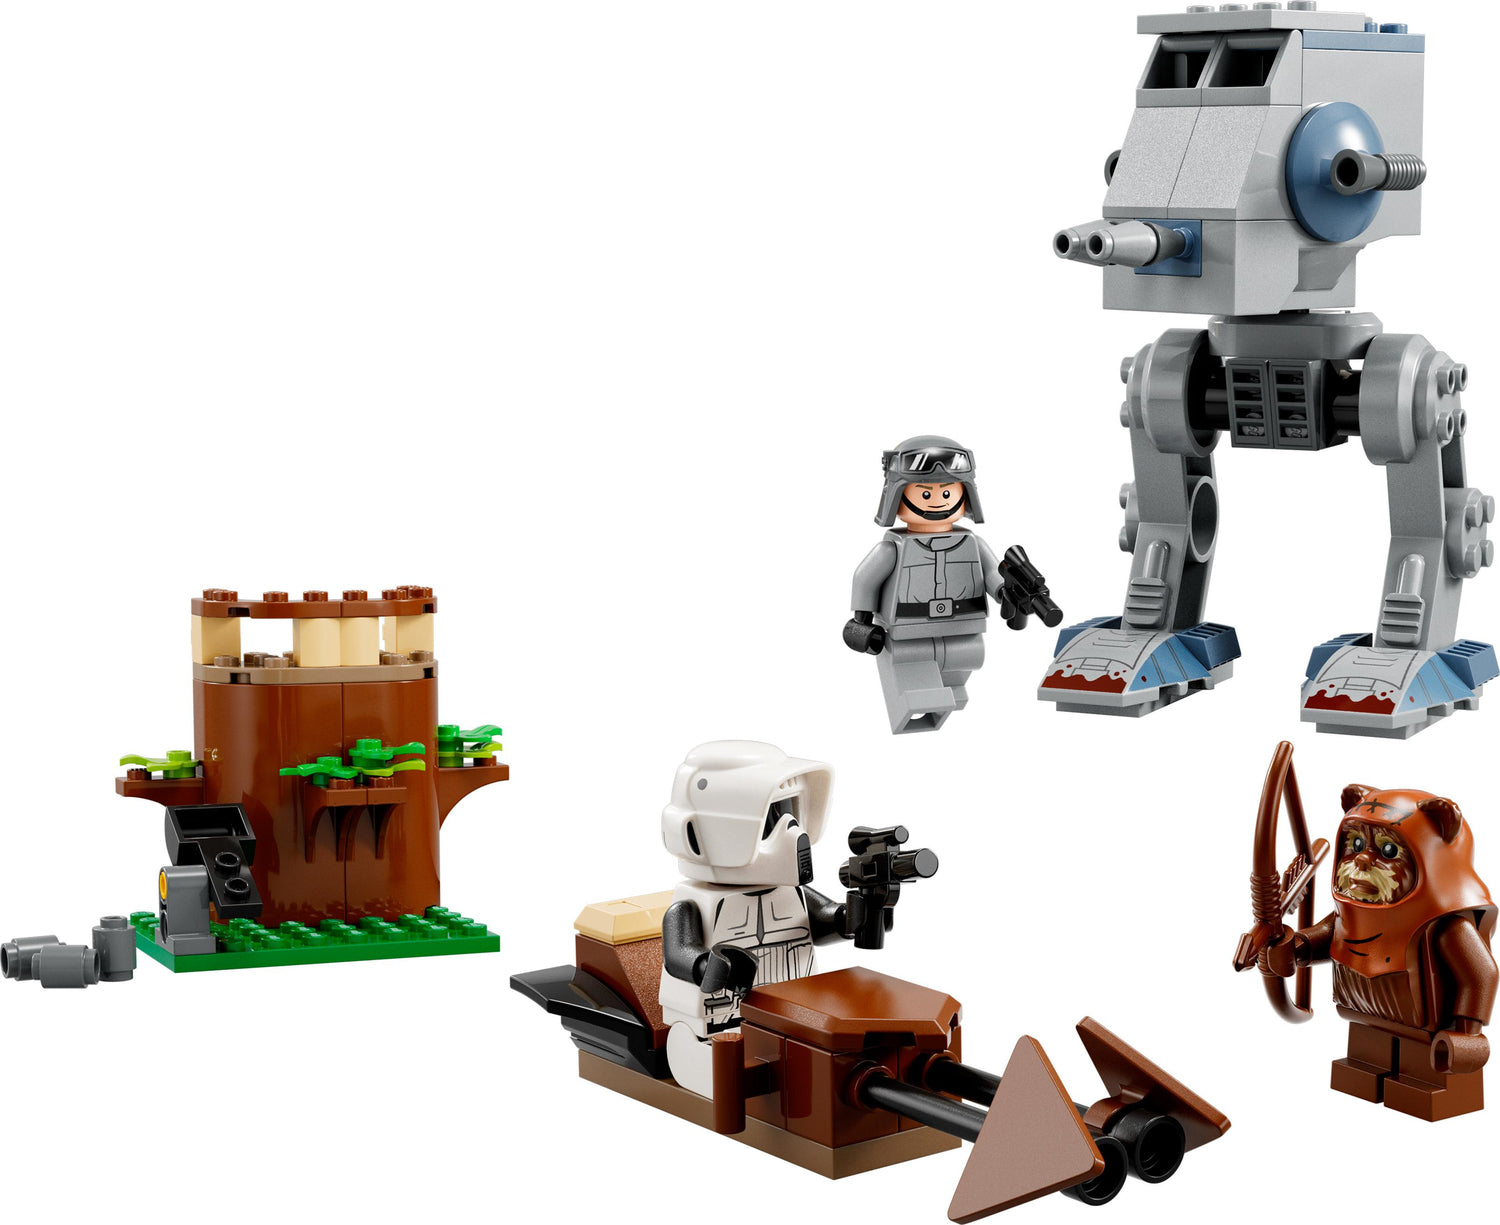 LEGO Wars AT-ST Buildable Toy|